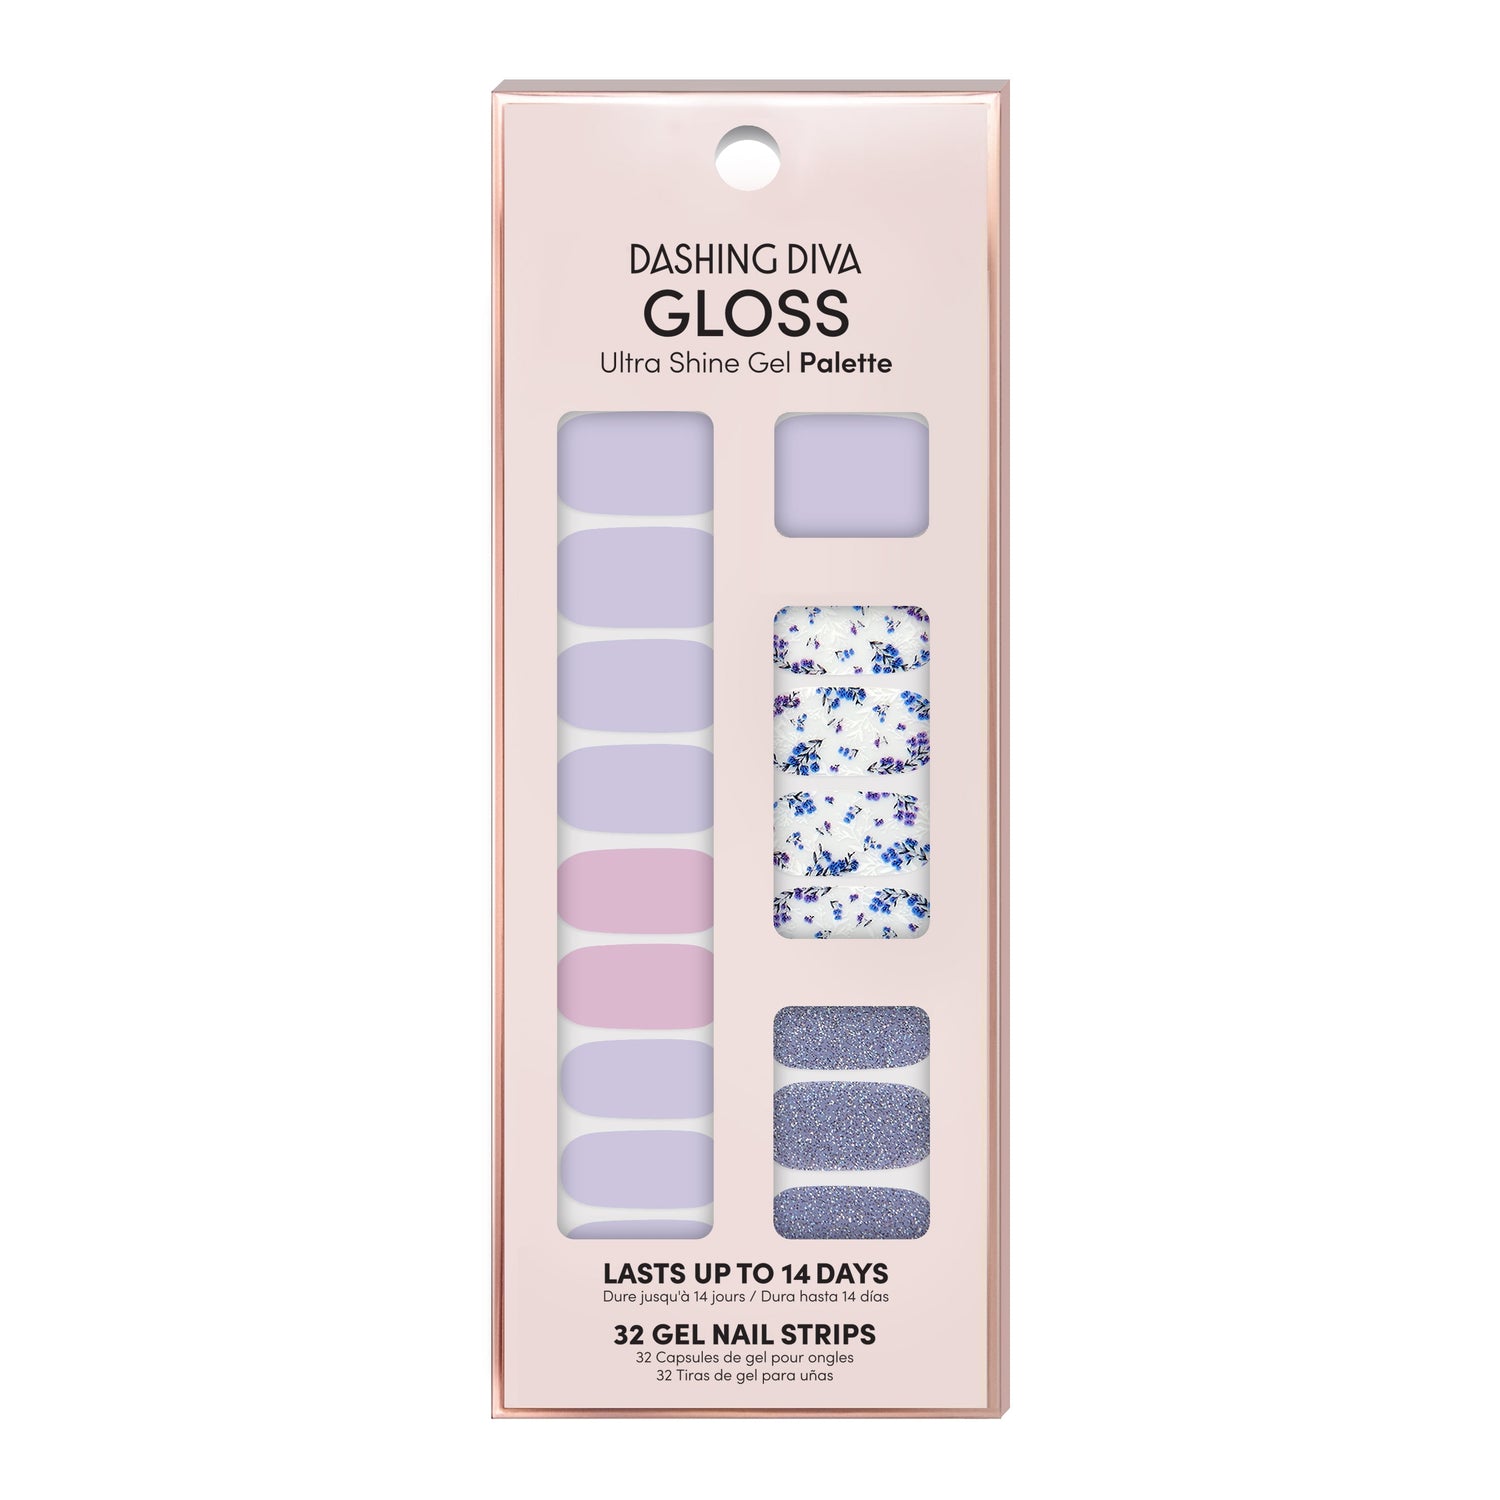 Dashing Diva GLOSS Spring and Easter blue gel nail strips with floral and blue glitter accents.